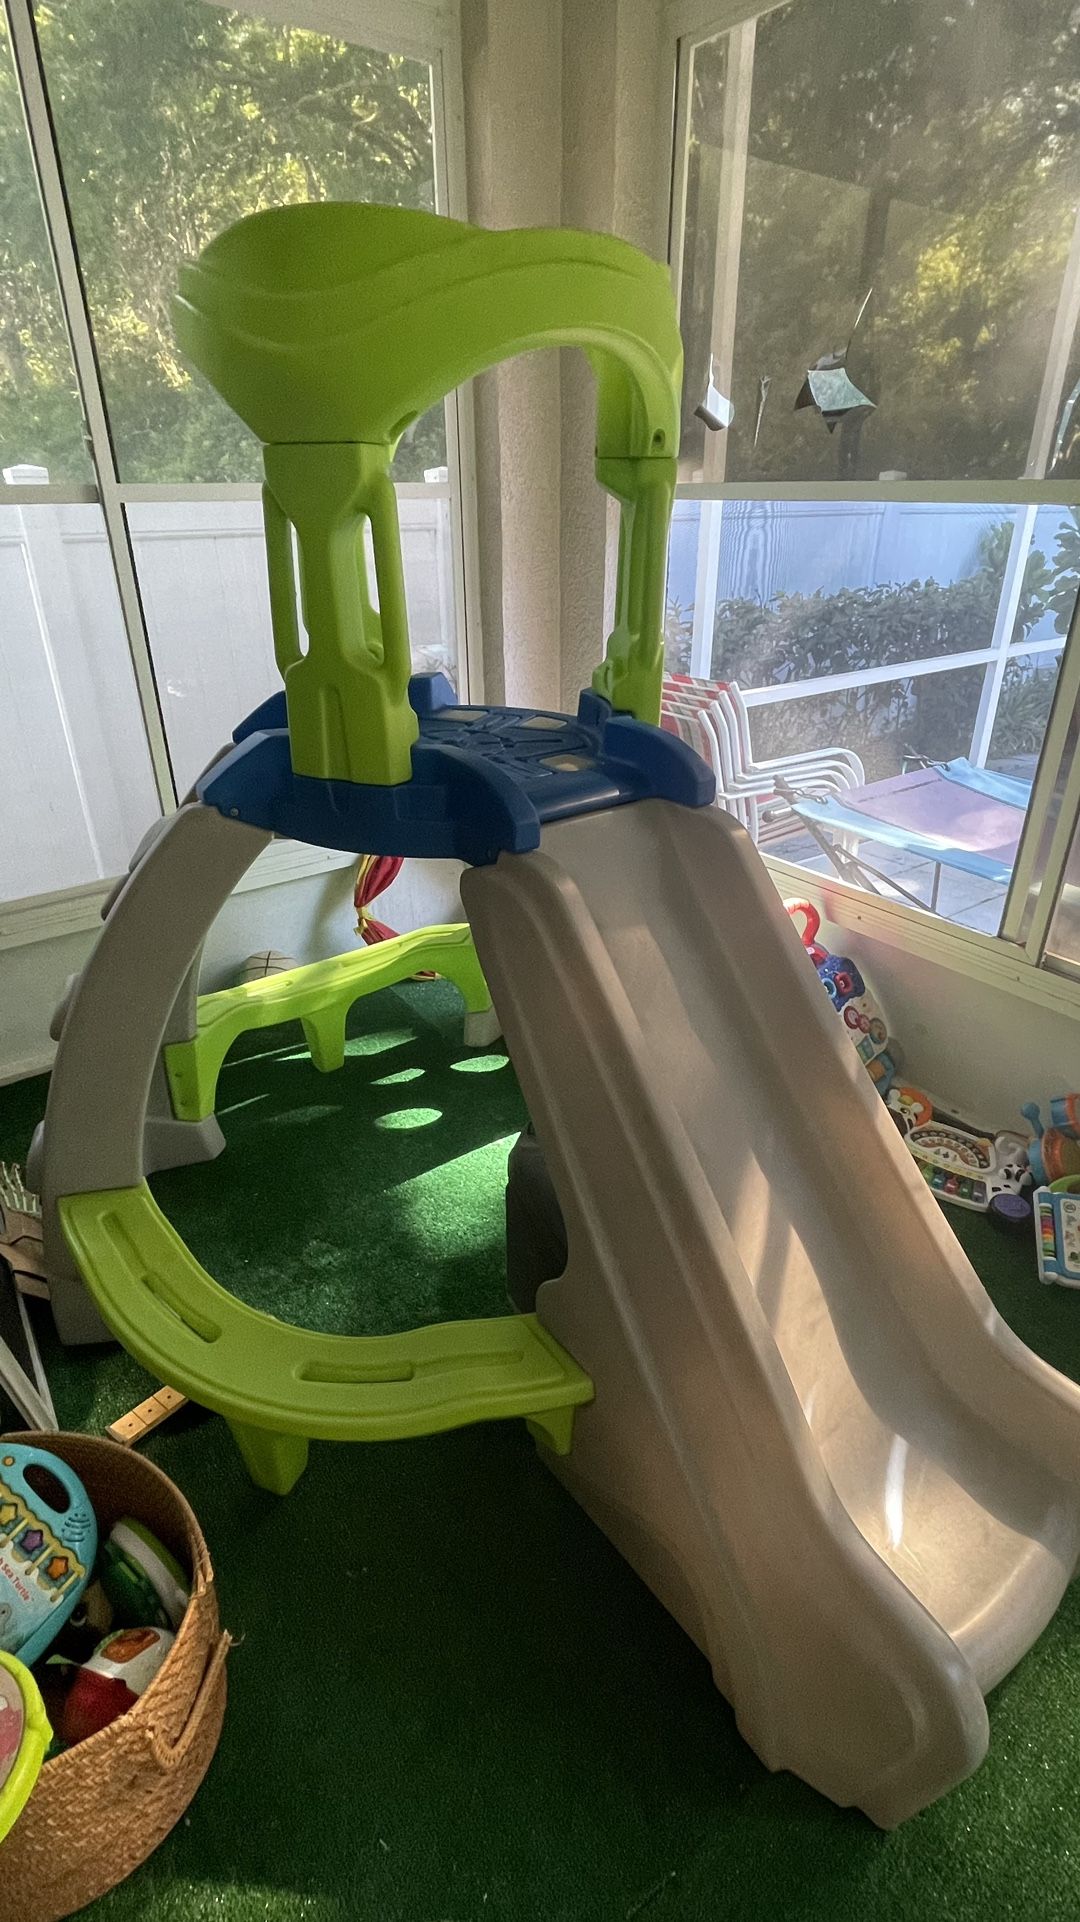 Kids climbing and slide toy